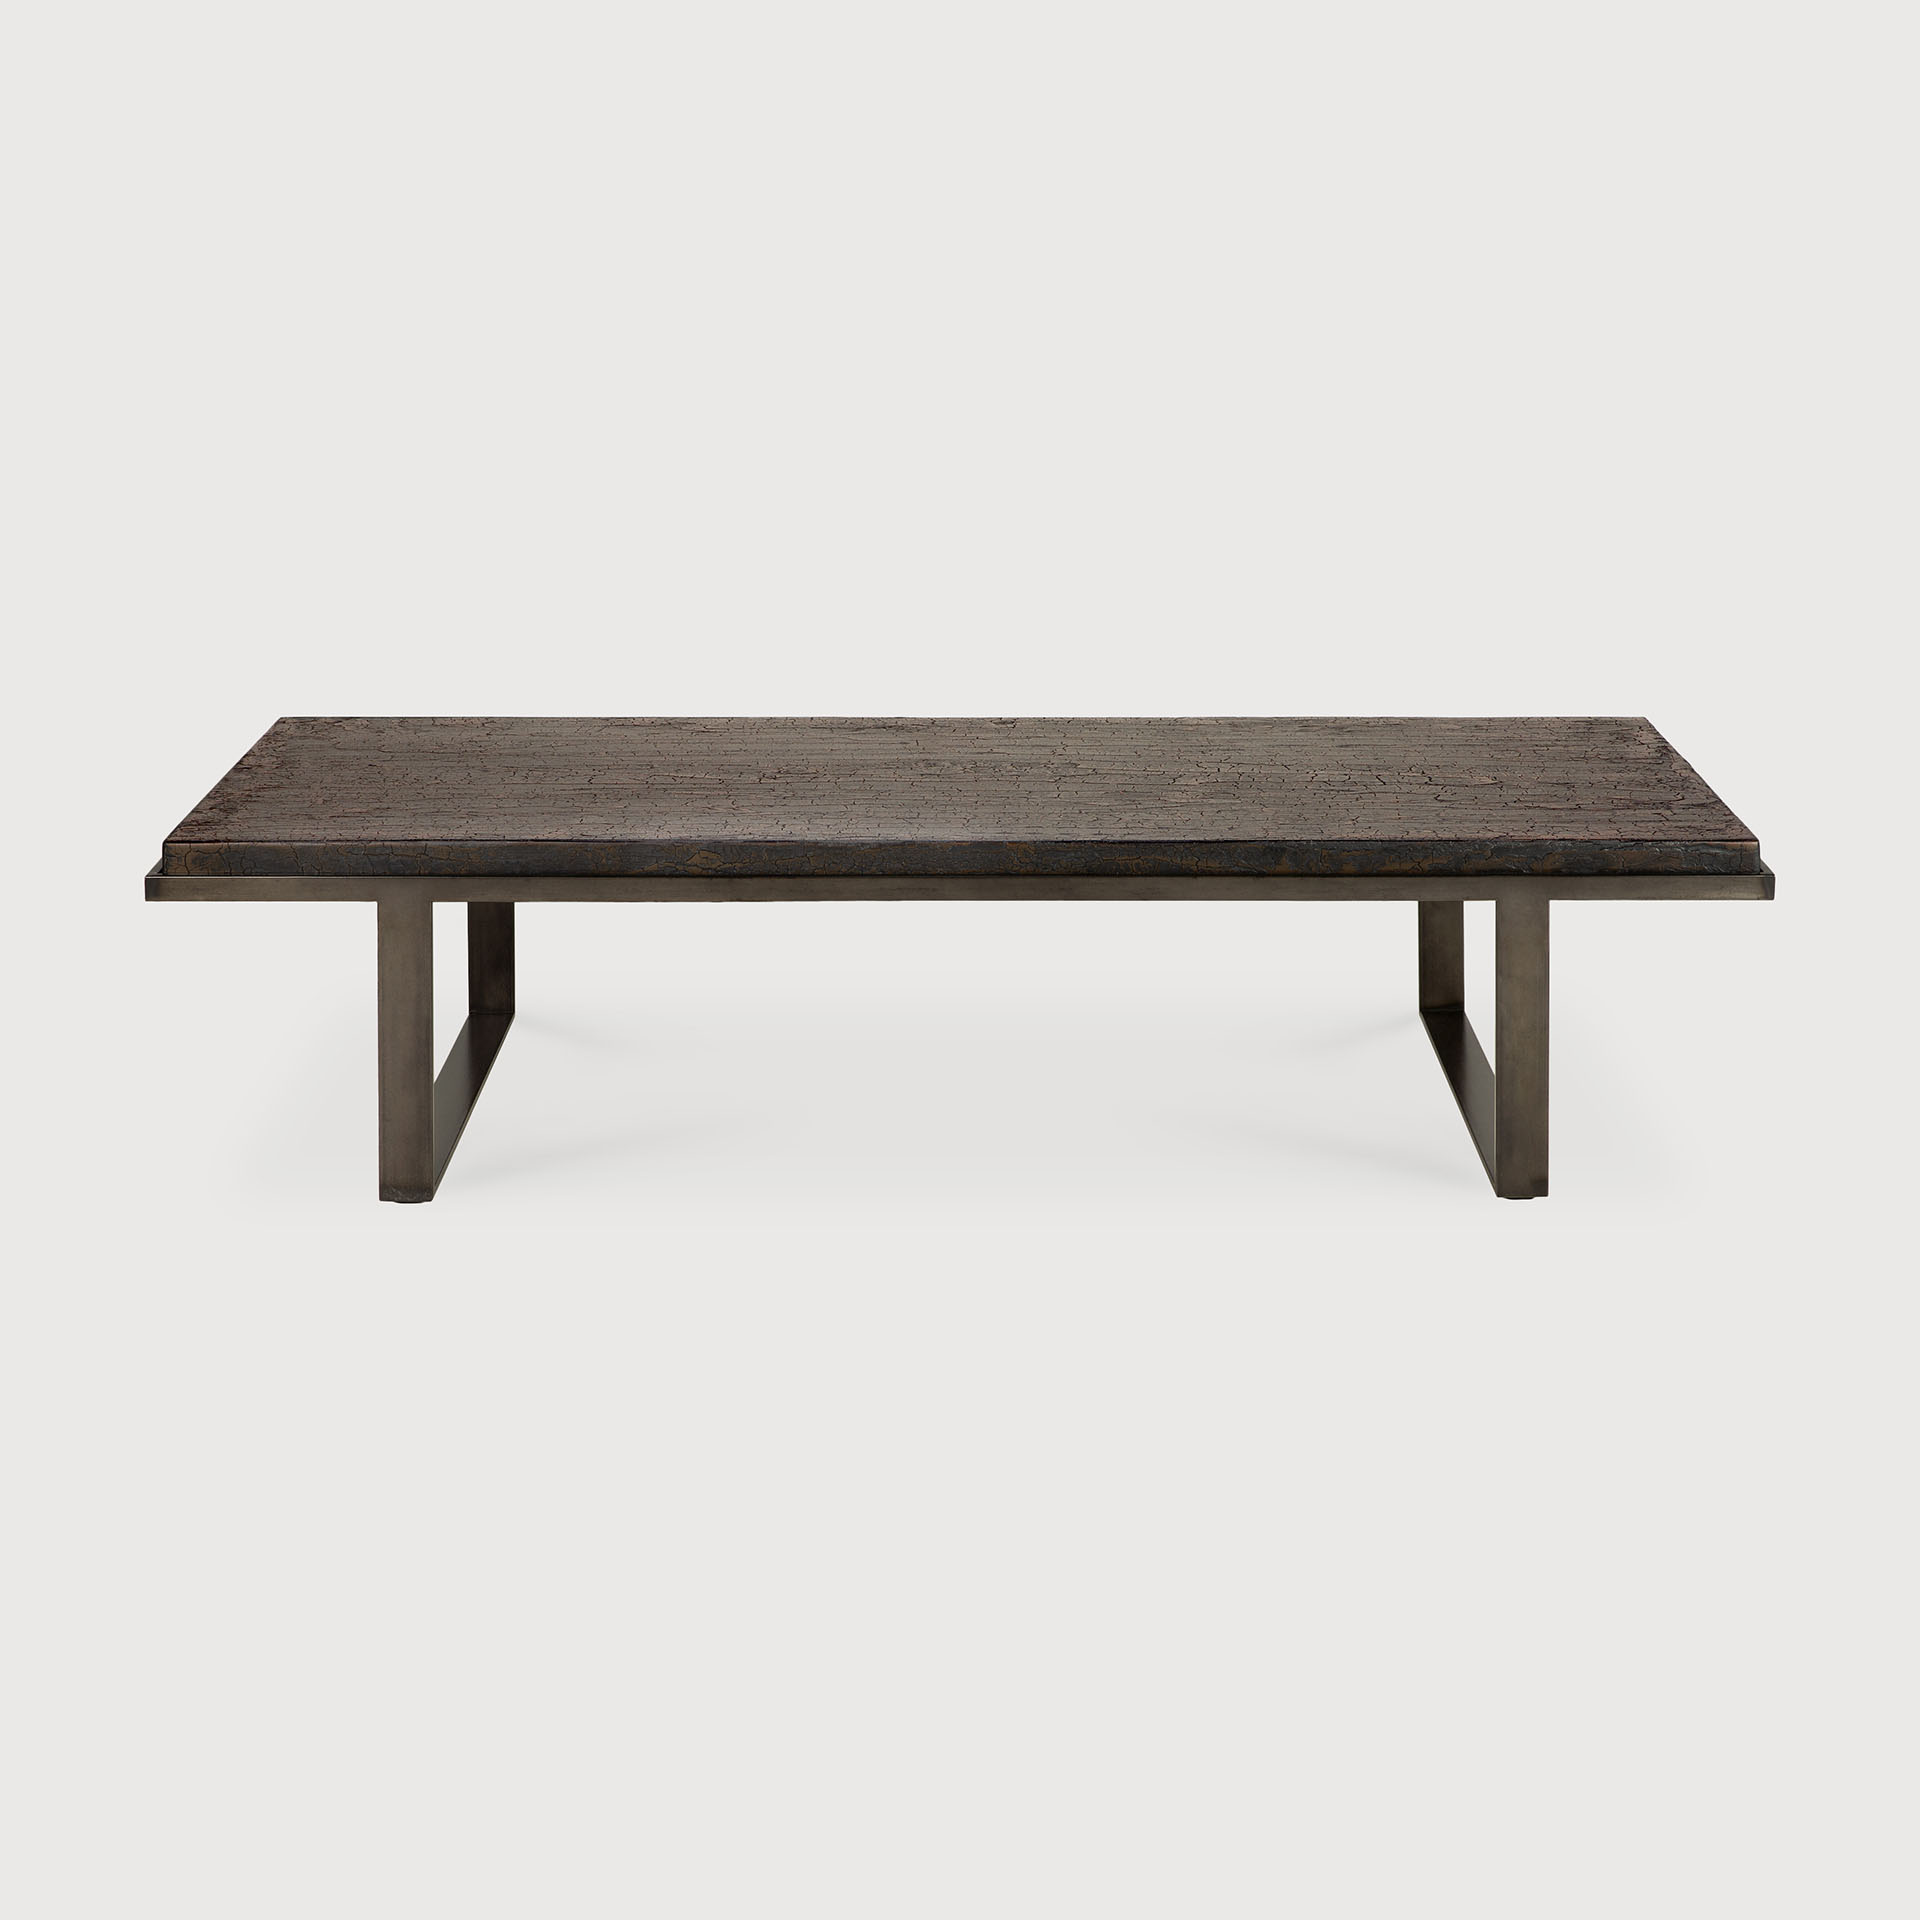 [25944] Stability coffee table